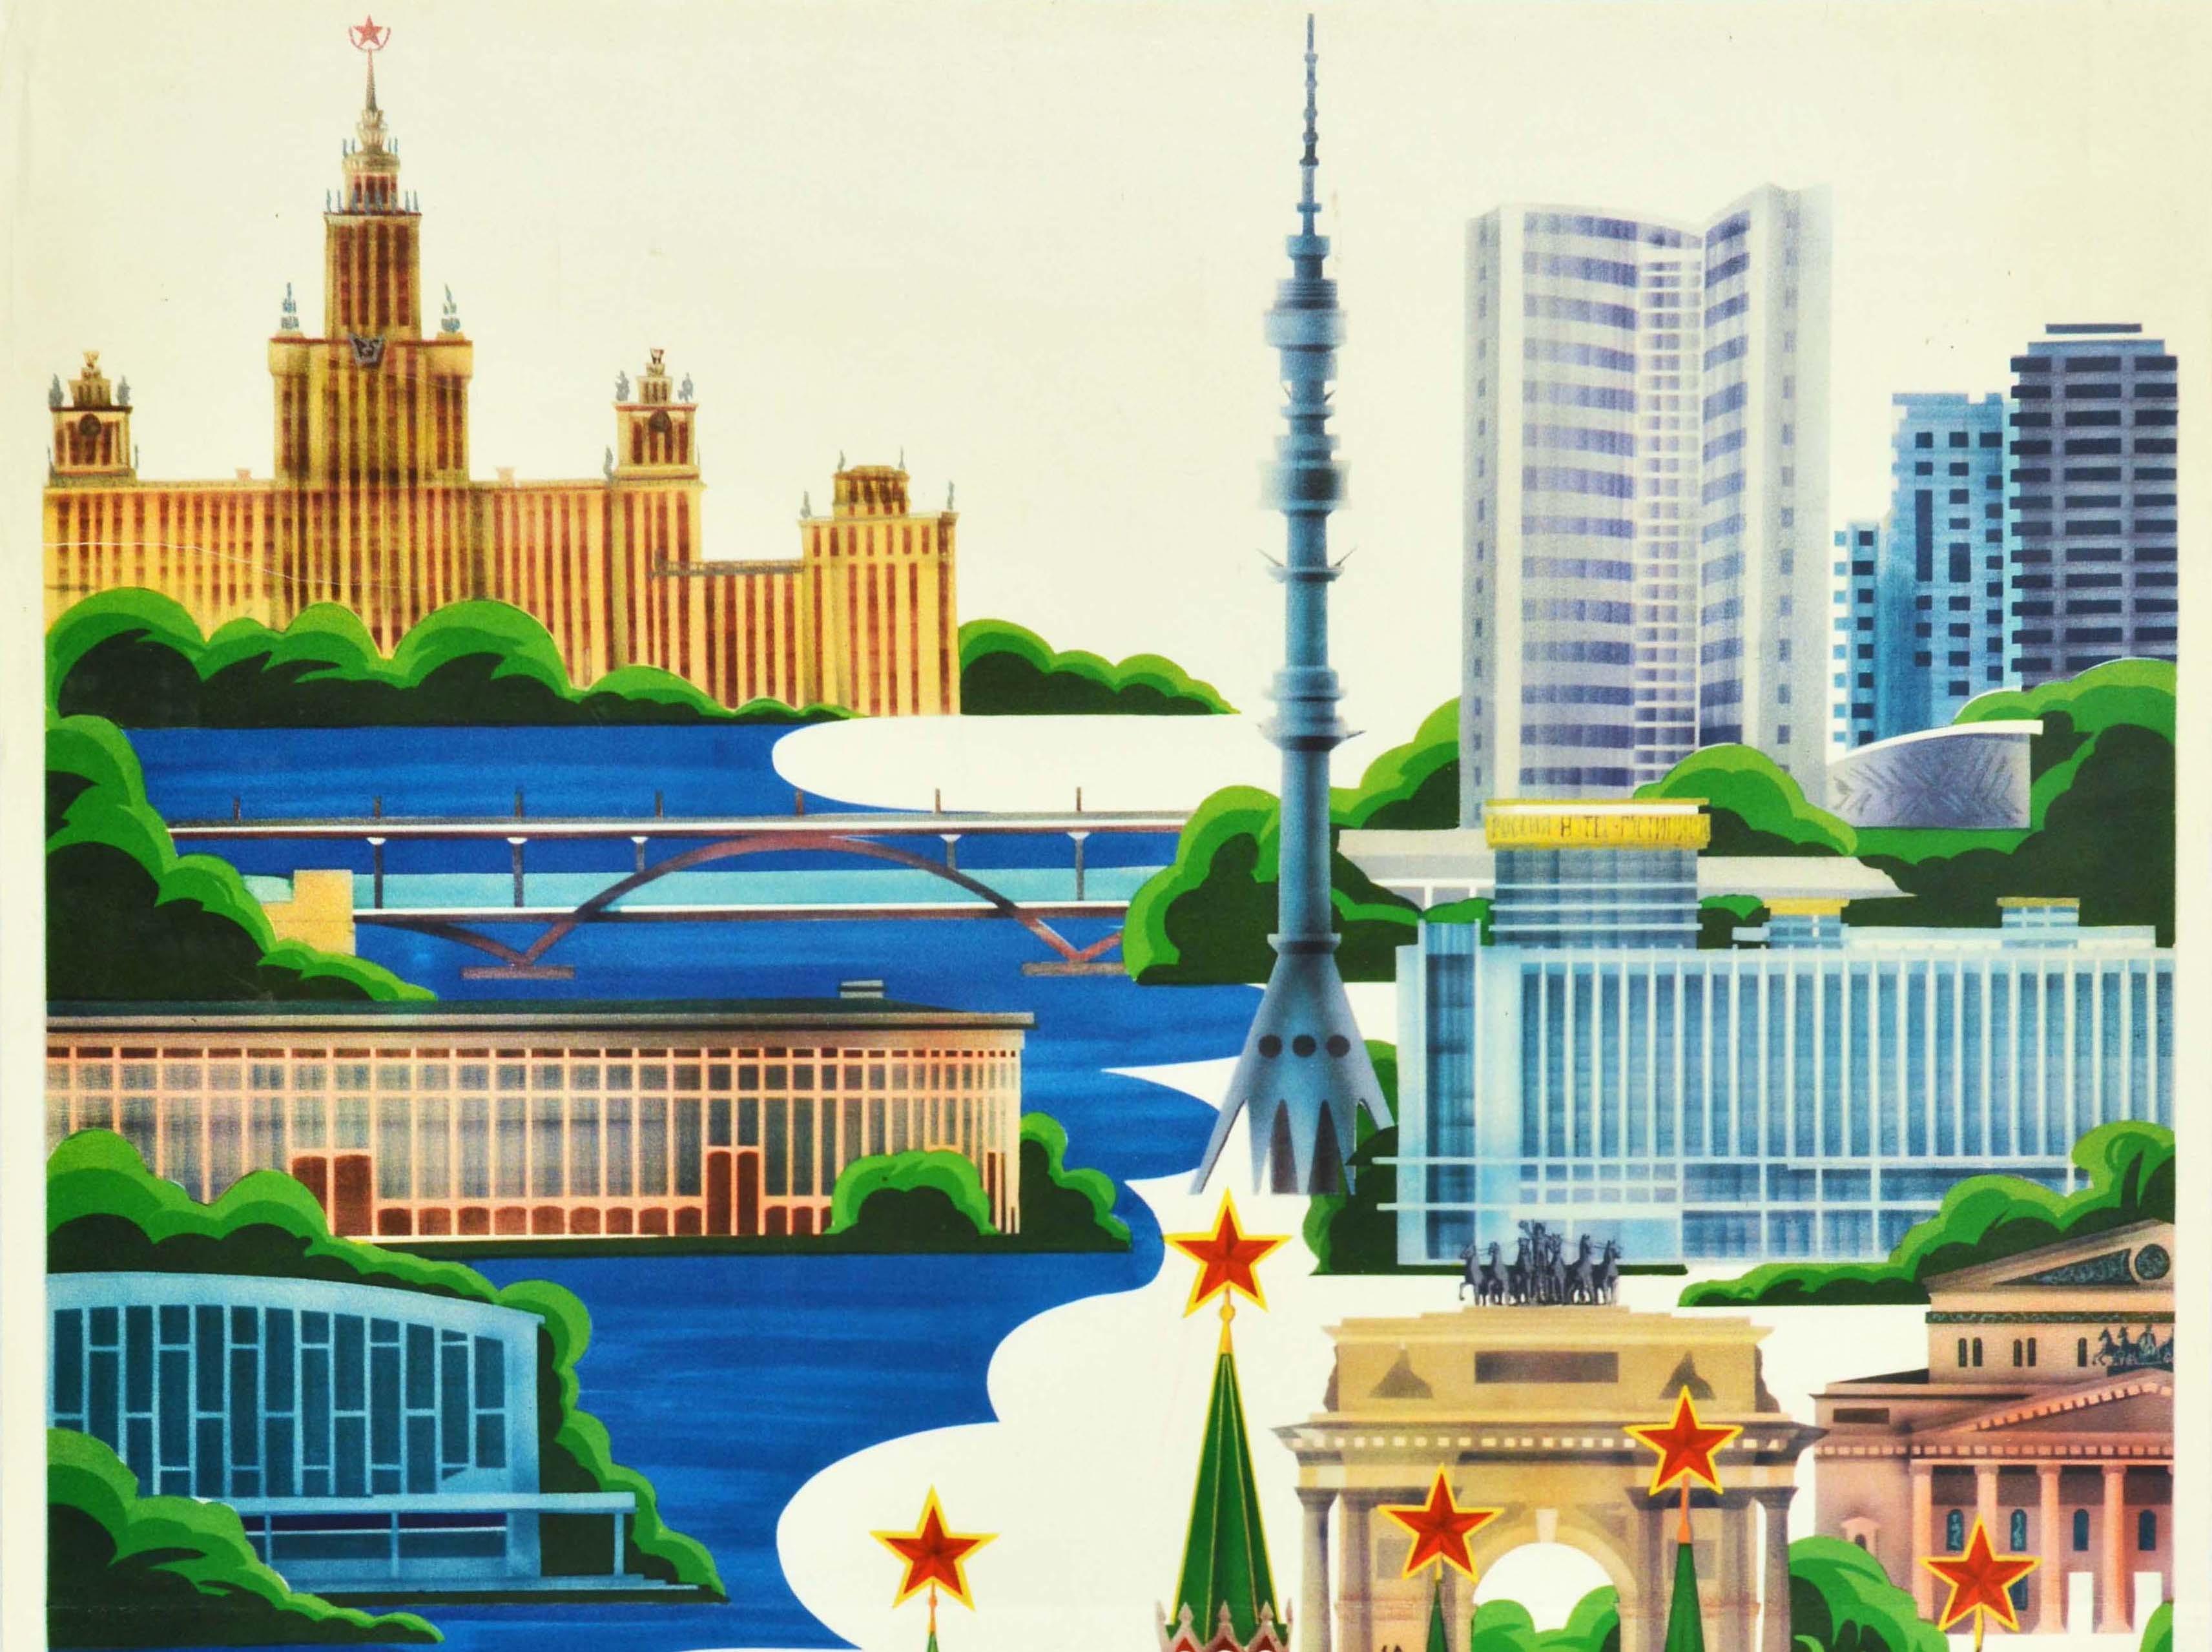 Original vintage Soviet sports poster for the 22nd Summer Olympic Games / Games of the XXII Olympiad in 1980 held in Moscow Russia featuring a colourful illustration of various historic and notable buildings in Moscow Russia including the Ostankino